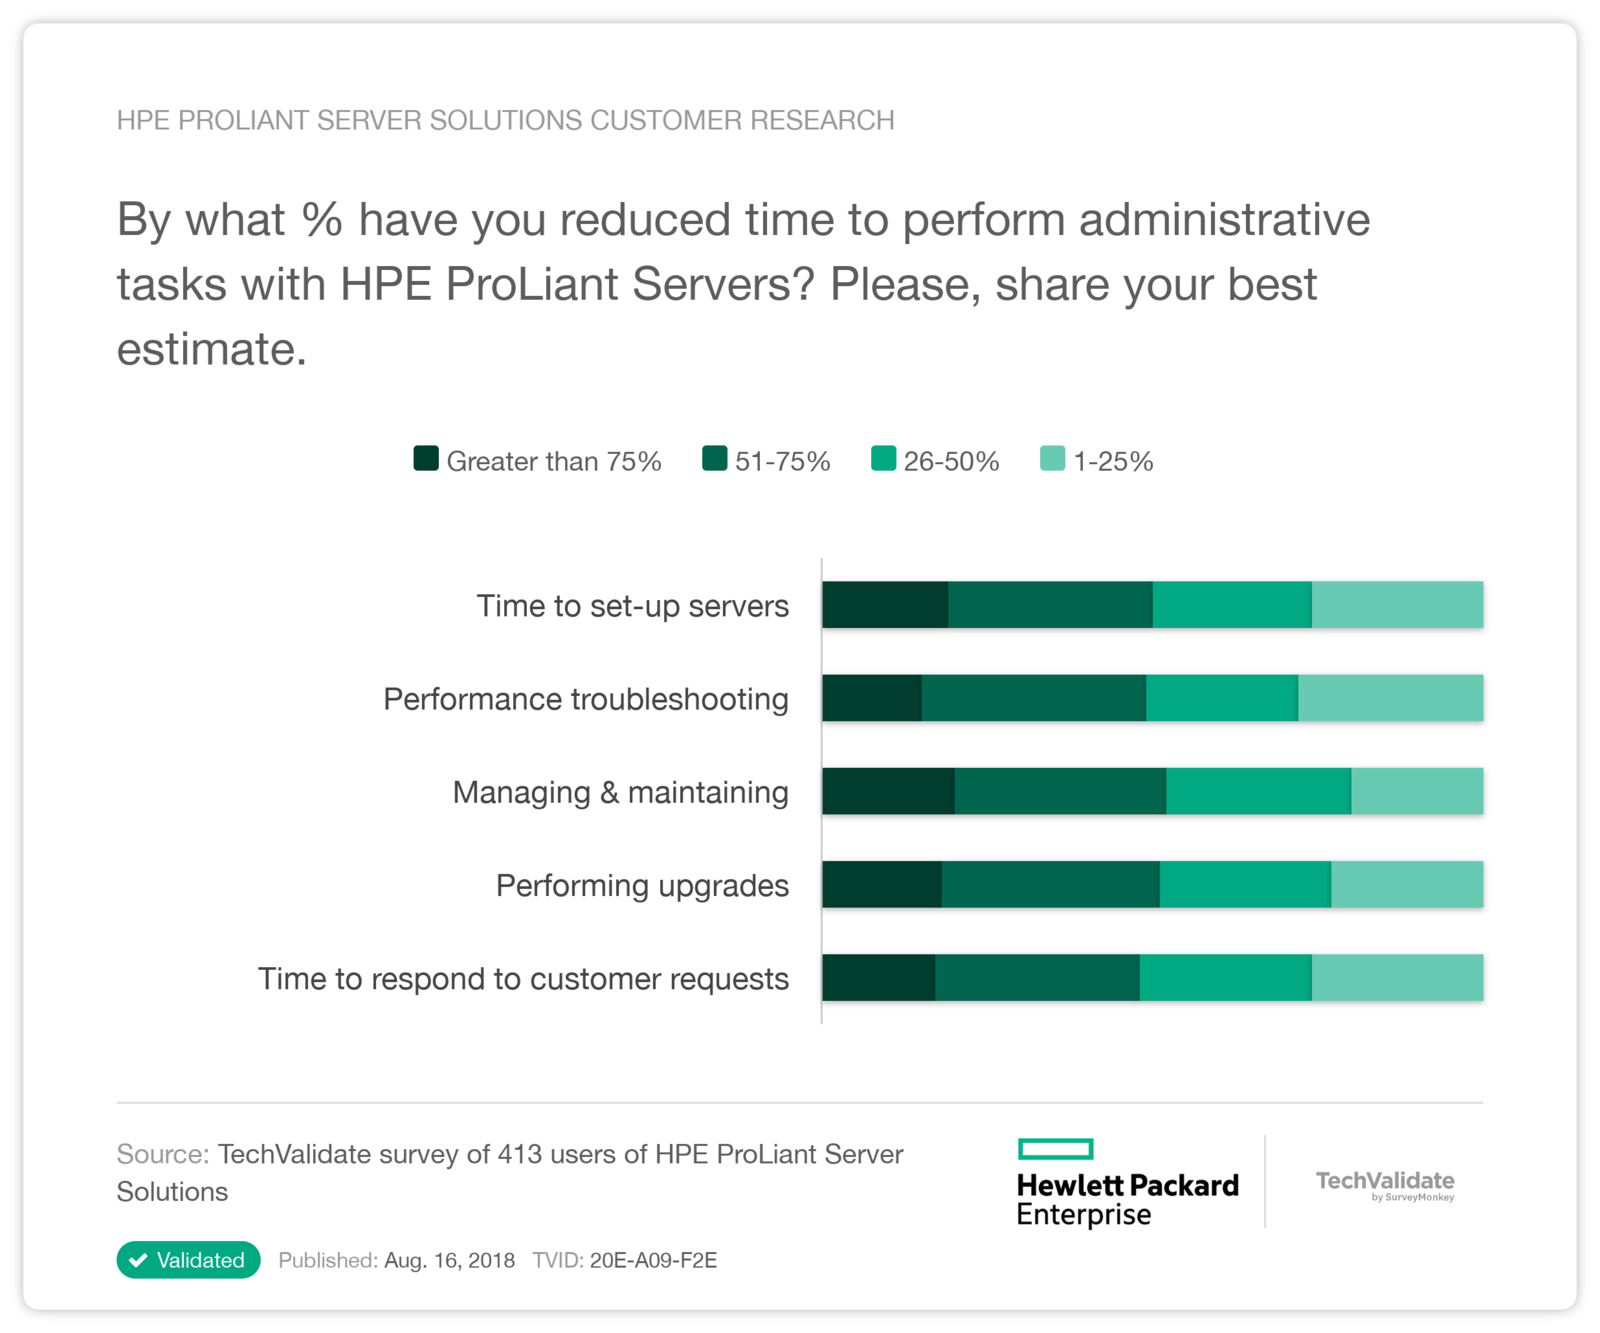 HPE ProLiant Server Solutions Customer Research